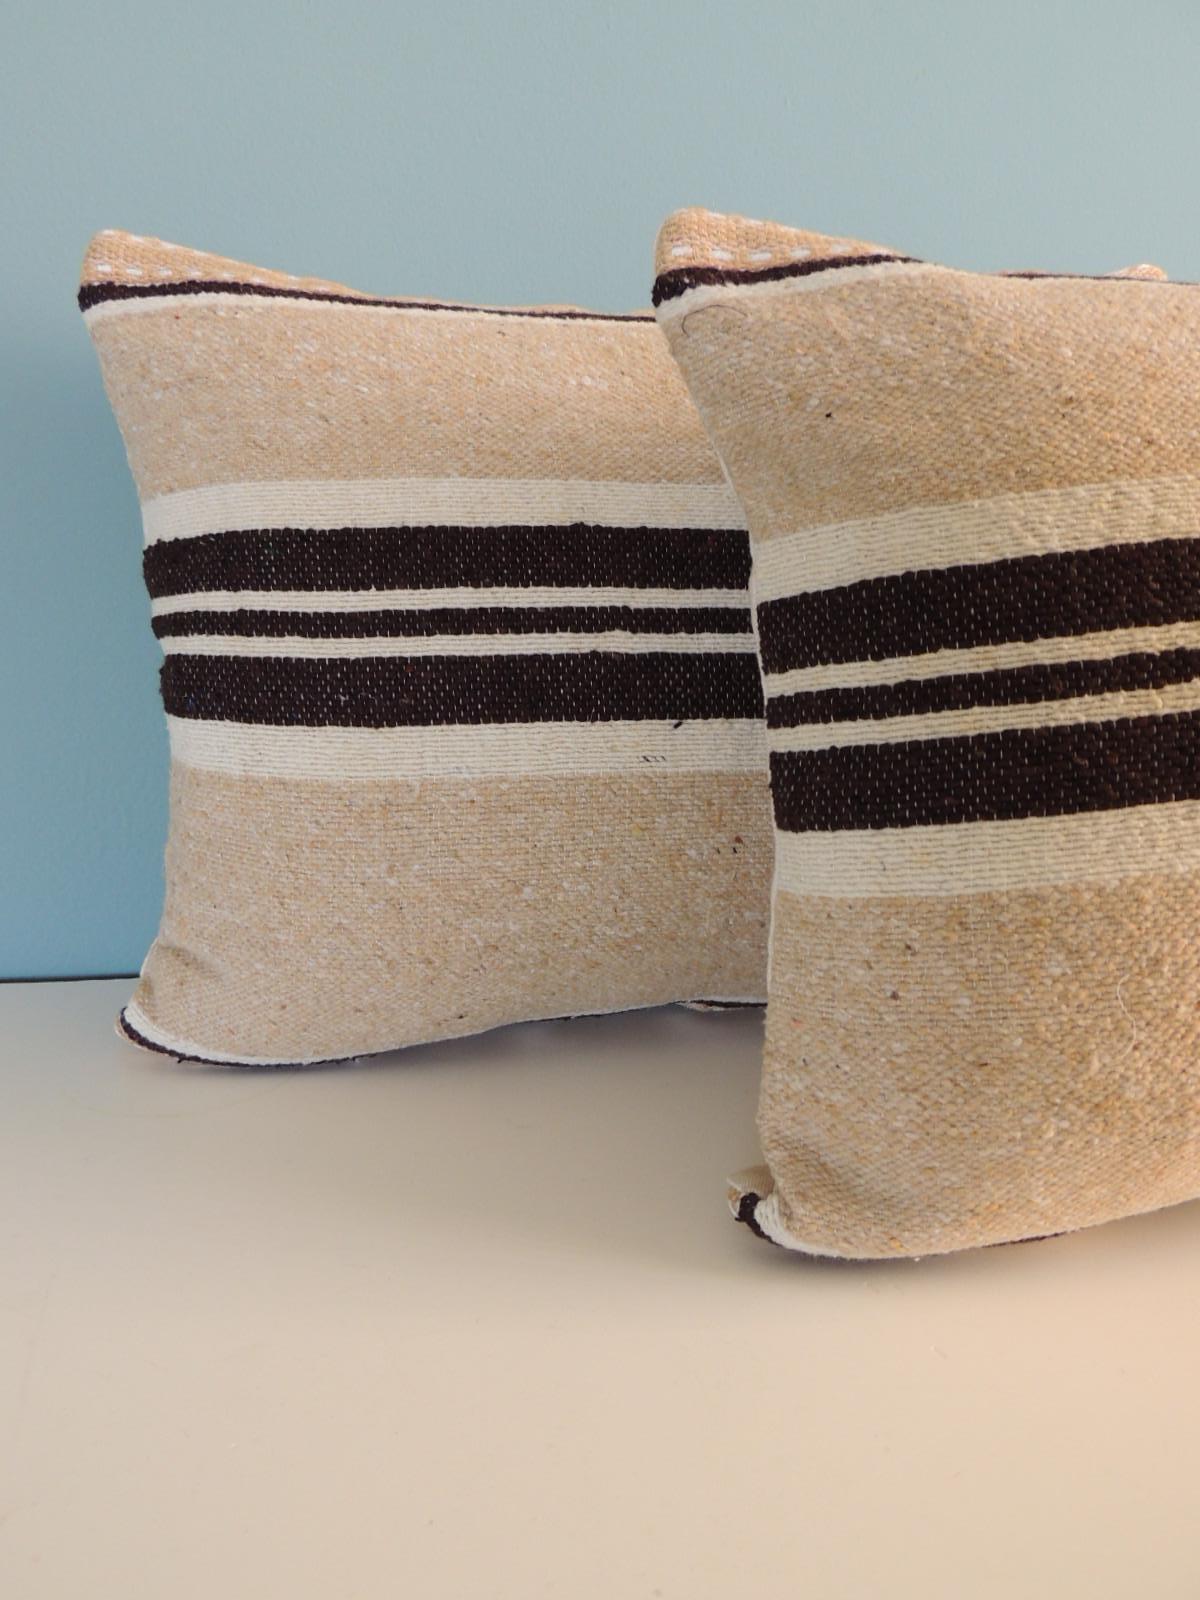 Pair of Vintage Tunisian woven brown & beige stripes decorative bolster pillows.
with cotton/linen backings. Embellished with vintage jute trim.
Decorative pillow handcrafted and designed in the USA.
Closure by stitch (no zipper closure) with